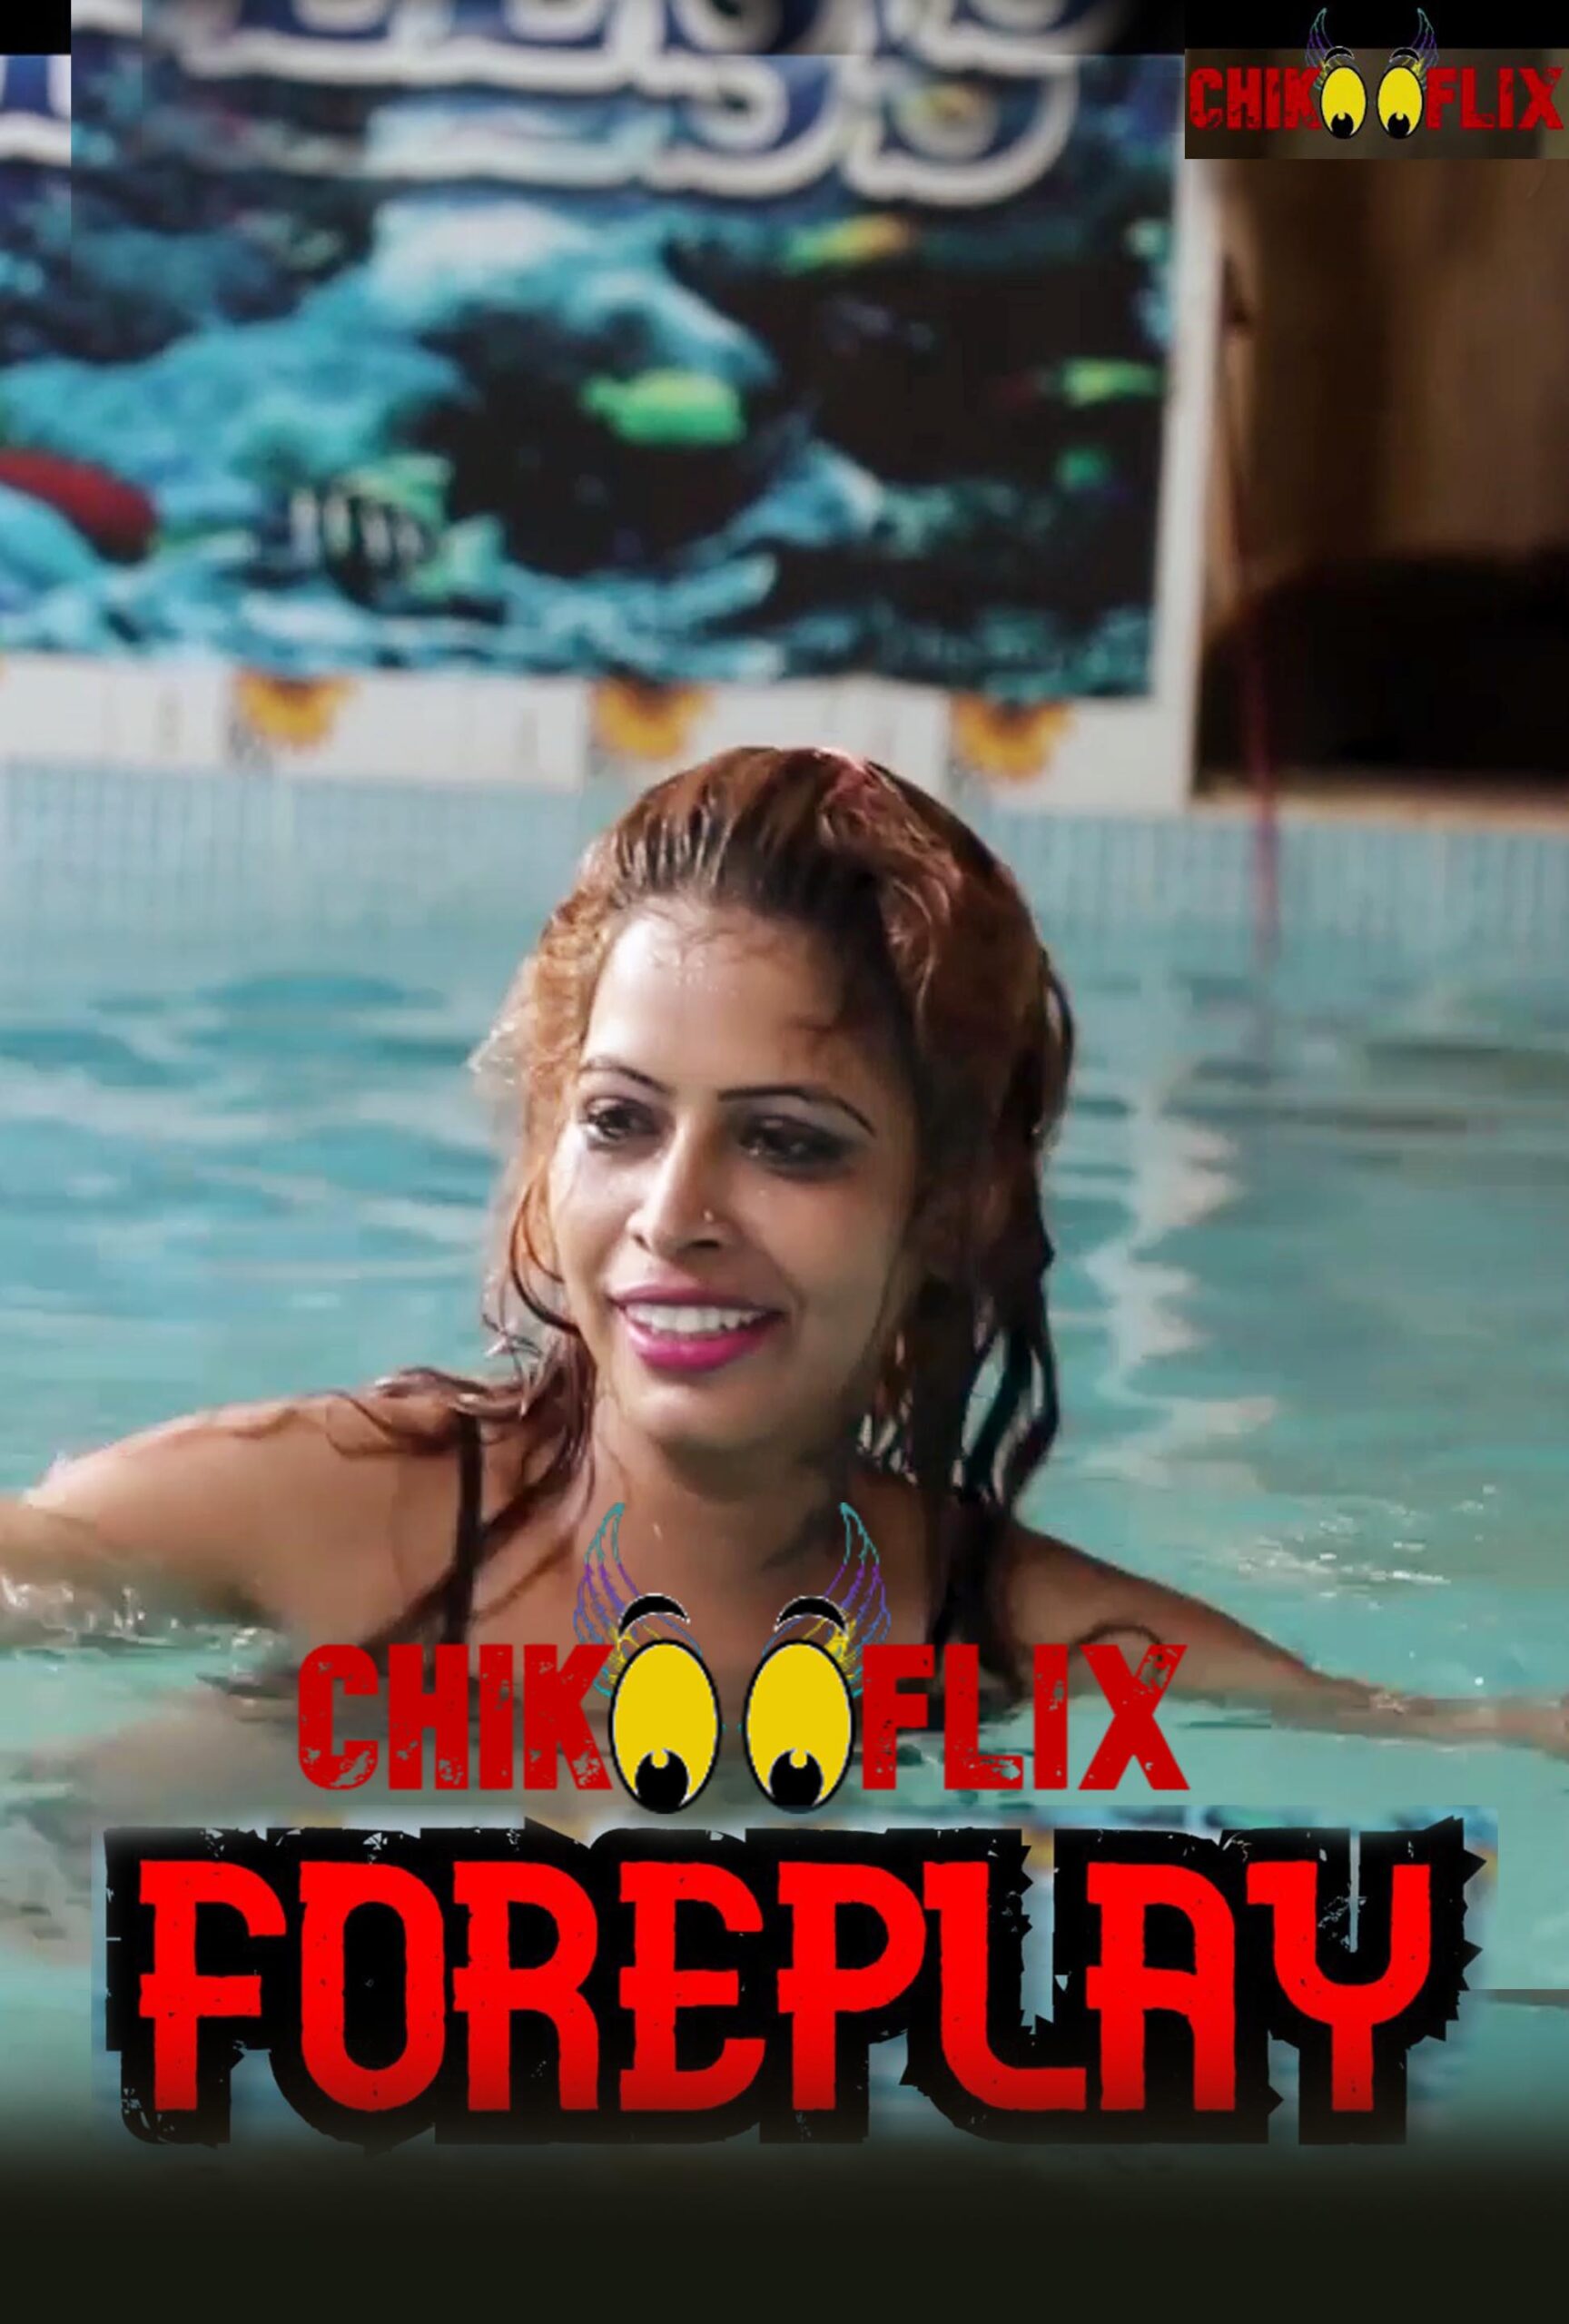 You are currently viewing Foreplay 2020 ChikooFlix Originals Hindi Short Film 720p HDRip 200MB Download & Watch Online